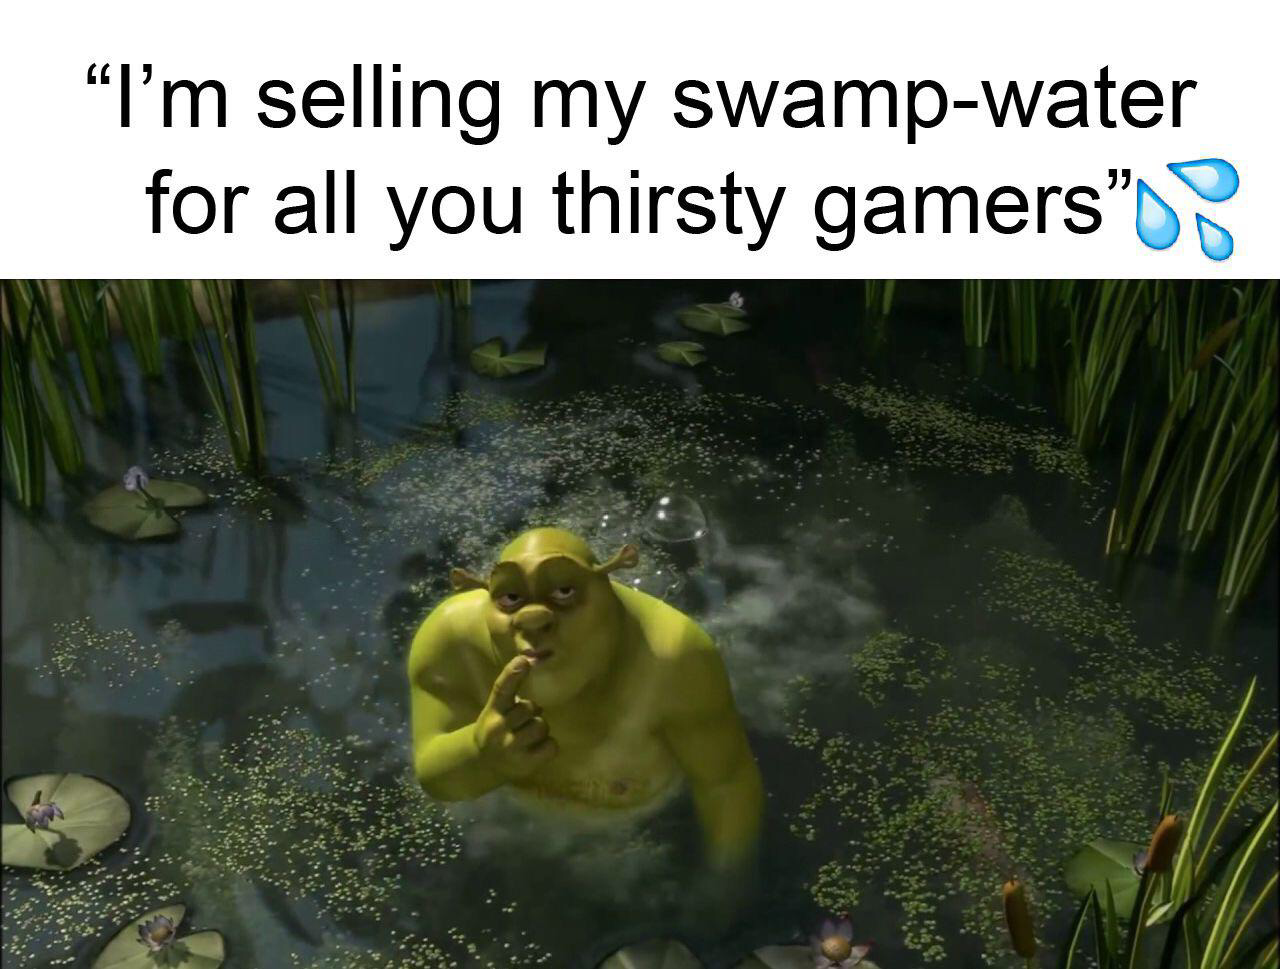 im selling my swamp water - "I'm selling my swampwater for all you thirsty gamers ?